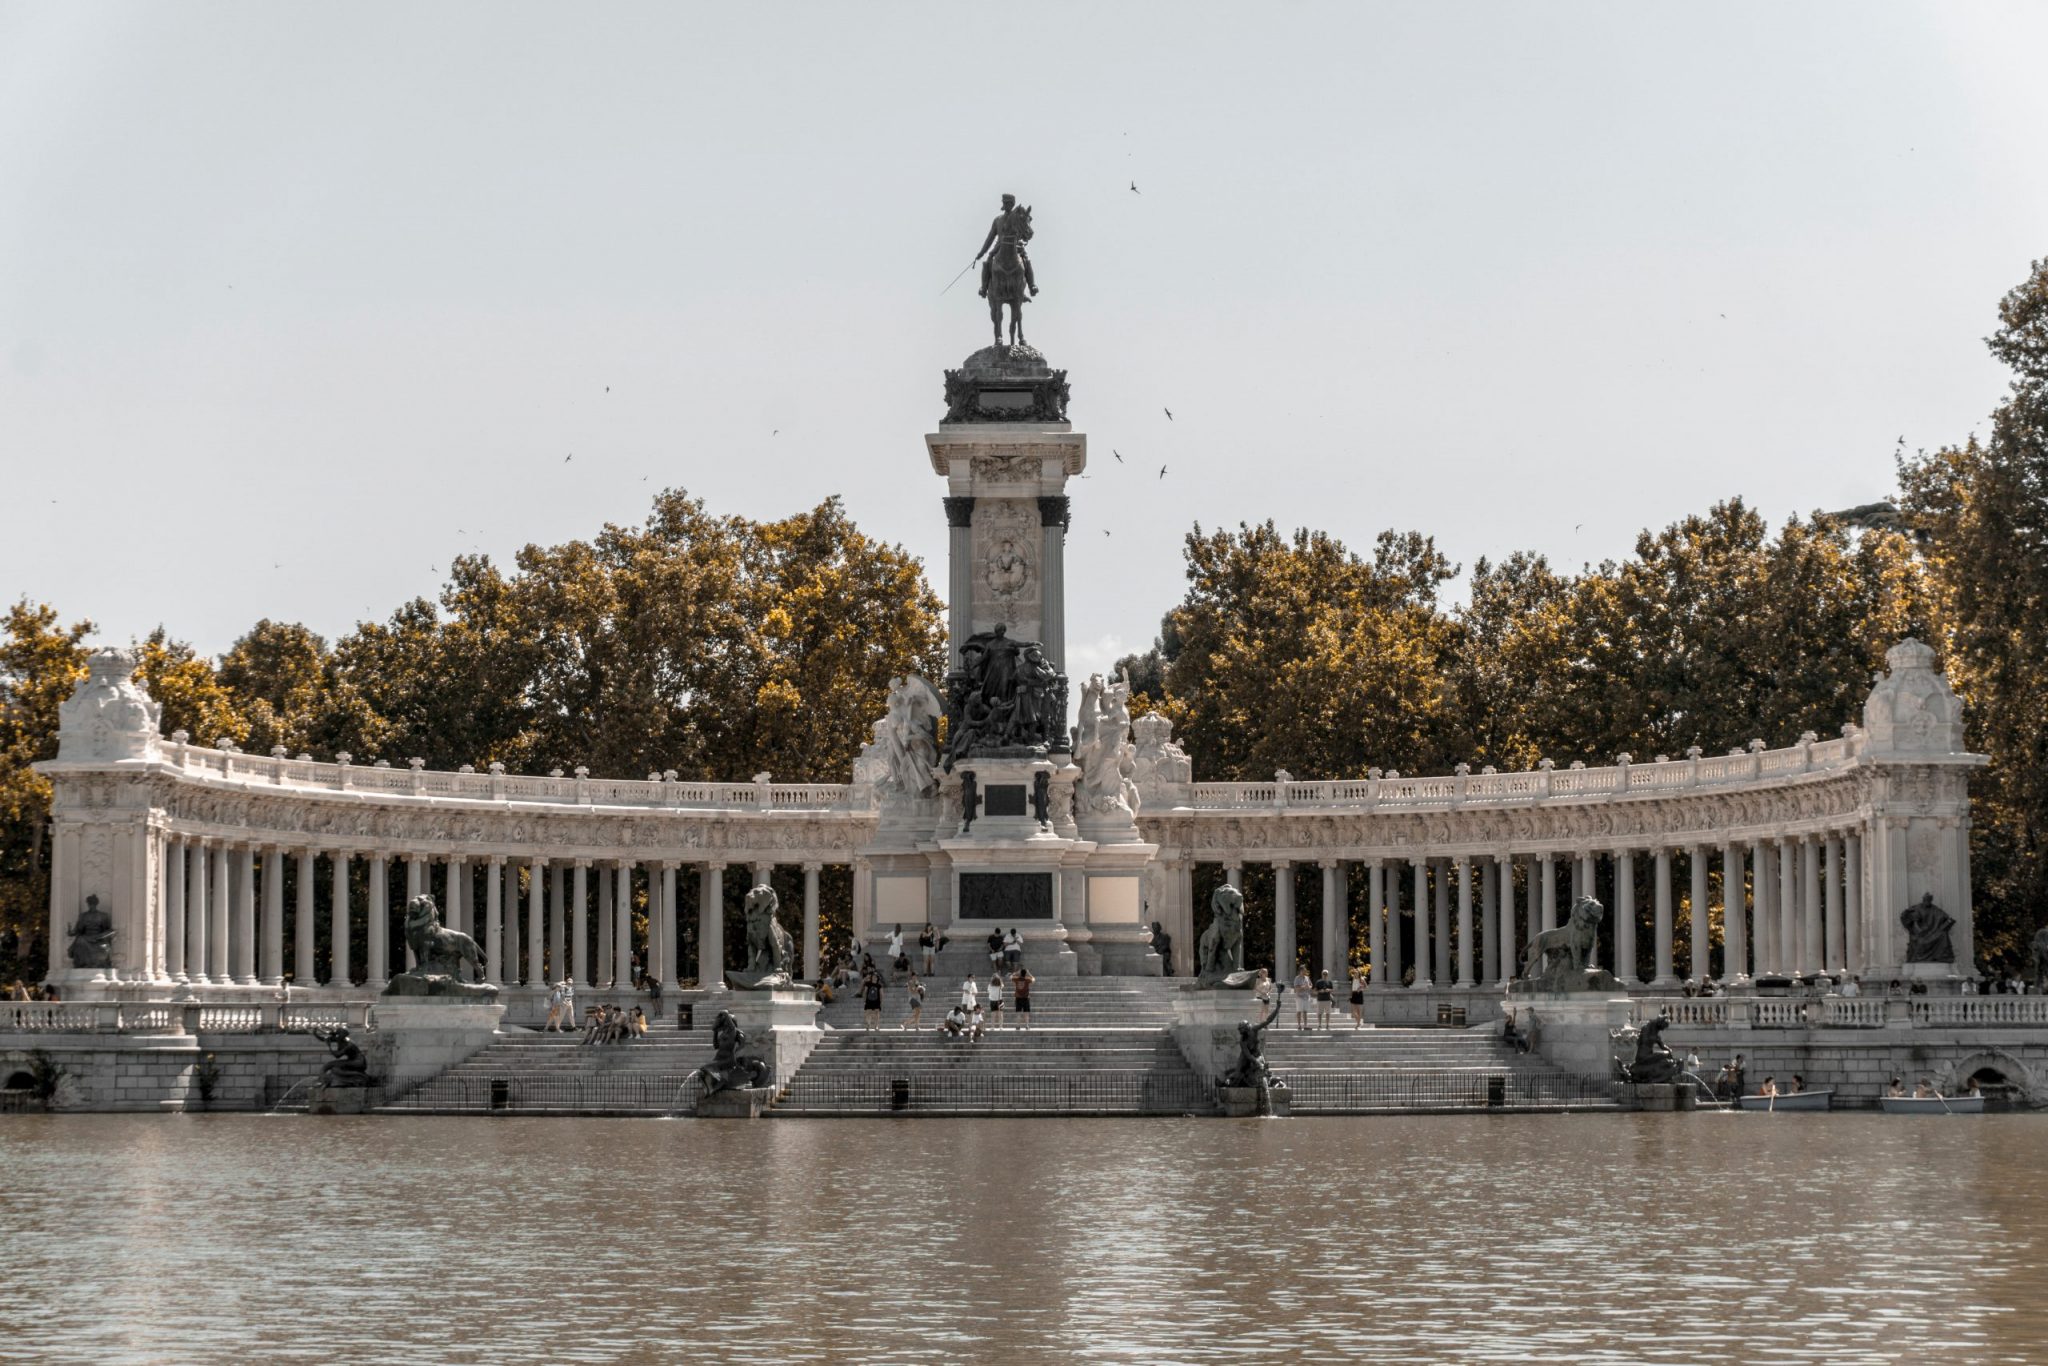 A photo of the pond at Buen Retiro Park in Madrid, Spain